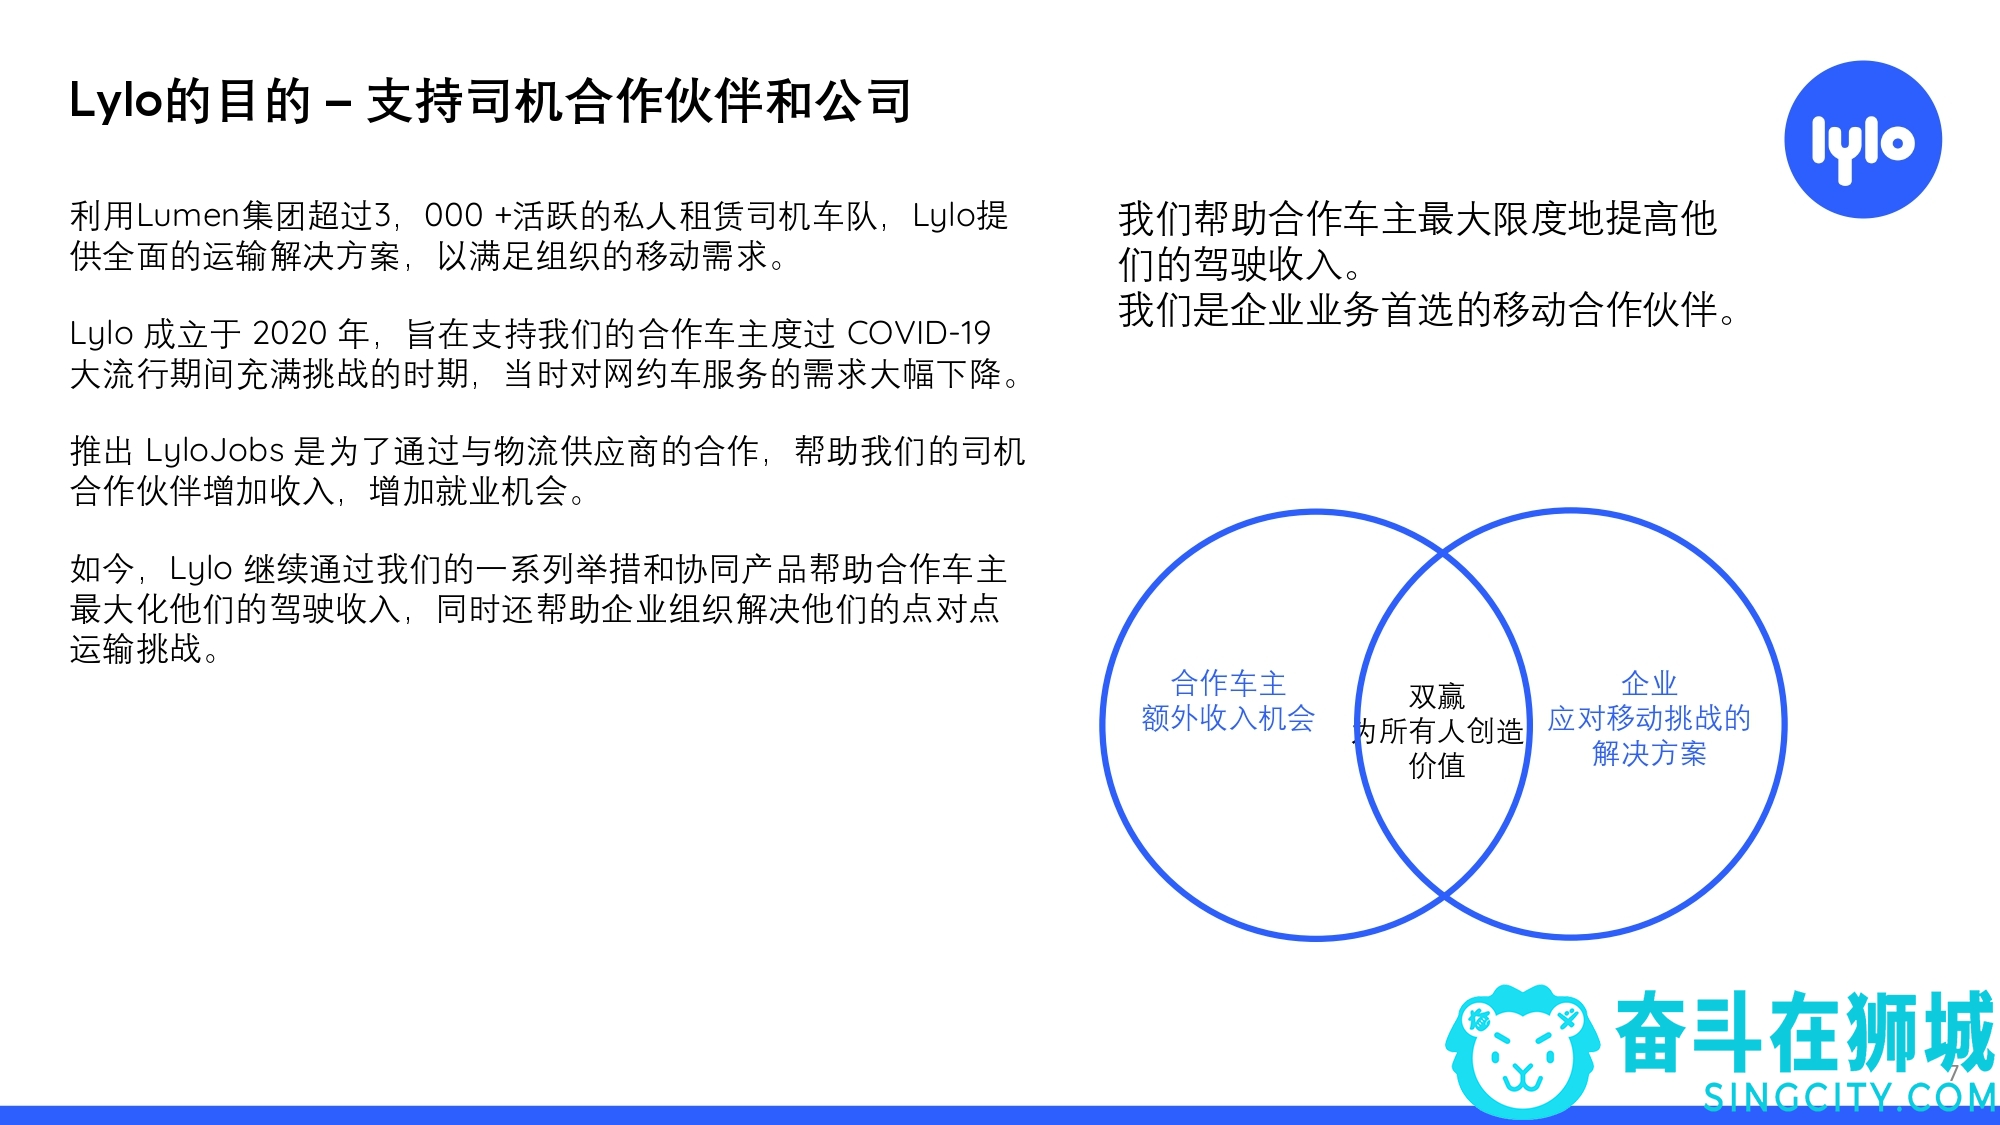 Lylo Introductory Deck v1.2 Chinese version_page-0007.jpg